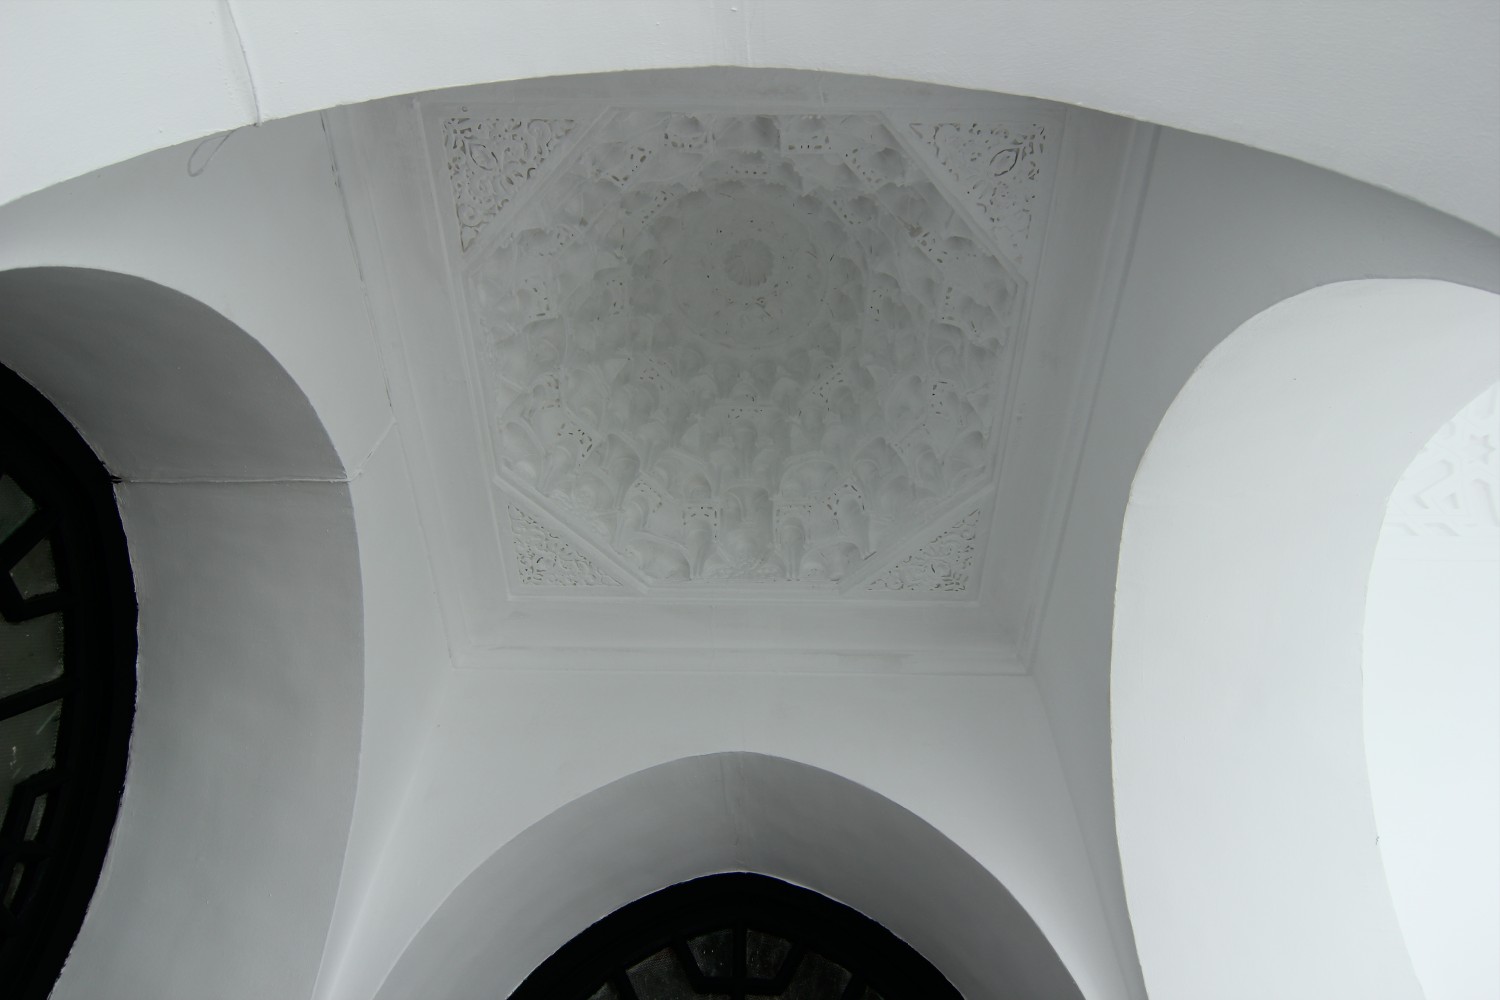 Interior view of dome in the crossing of two galleries showing muqarnas